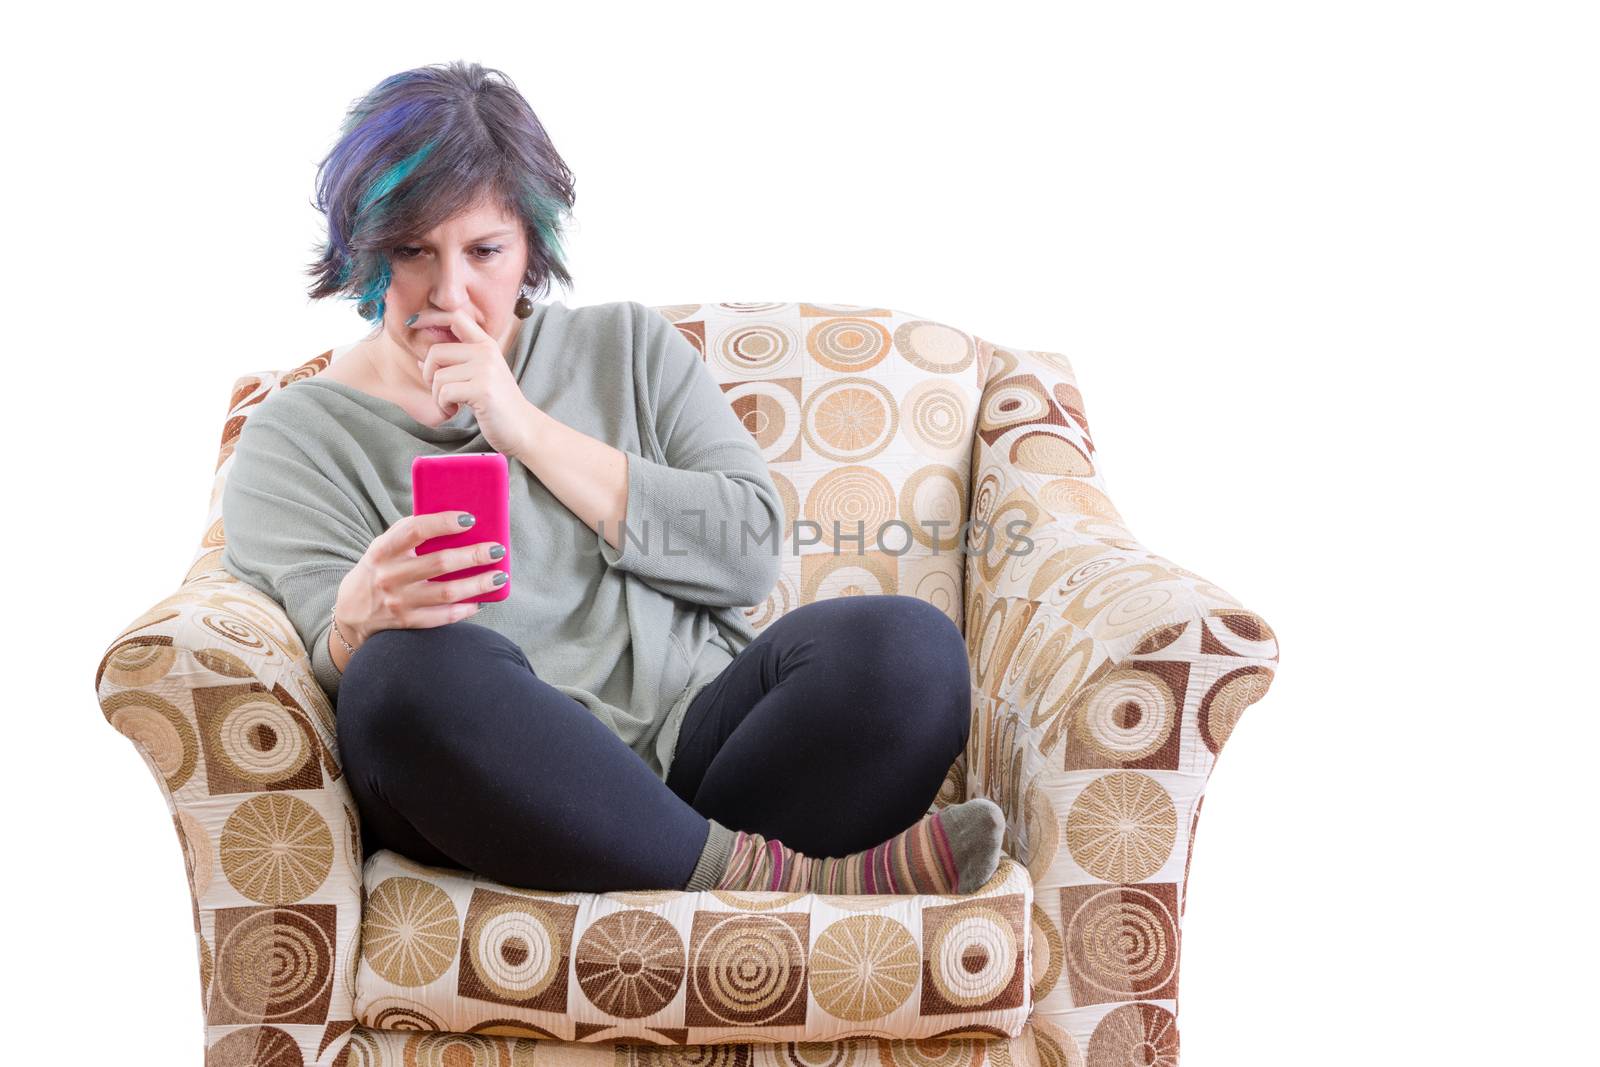 Single middle-aged plump woman with concerned expression looking at phone on comfy sofa